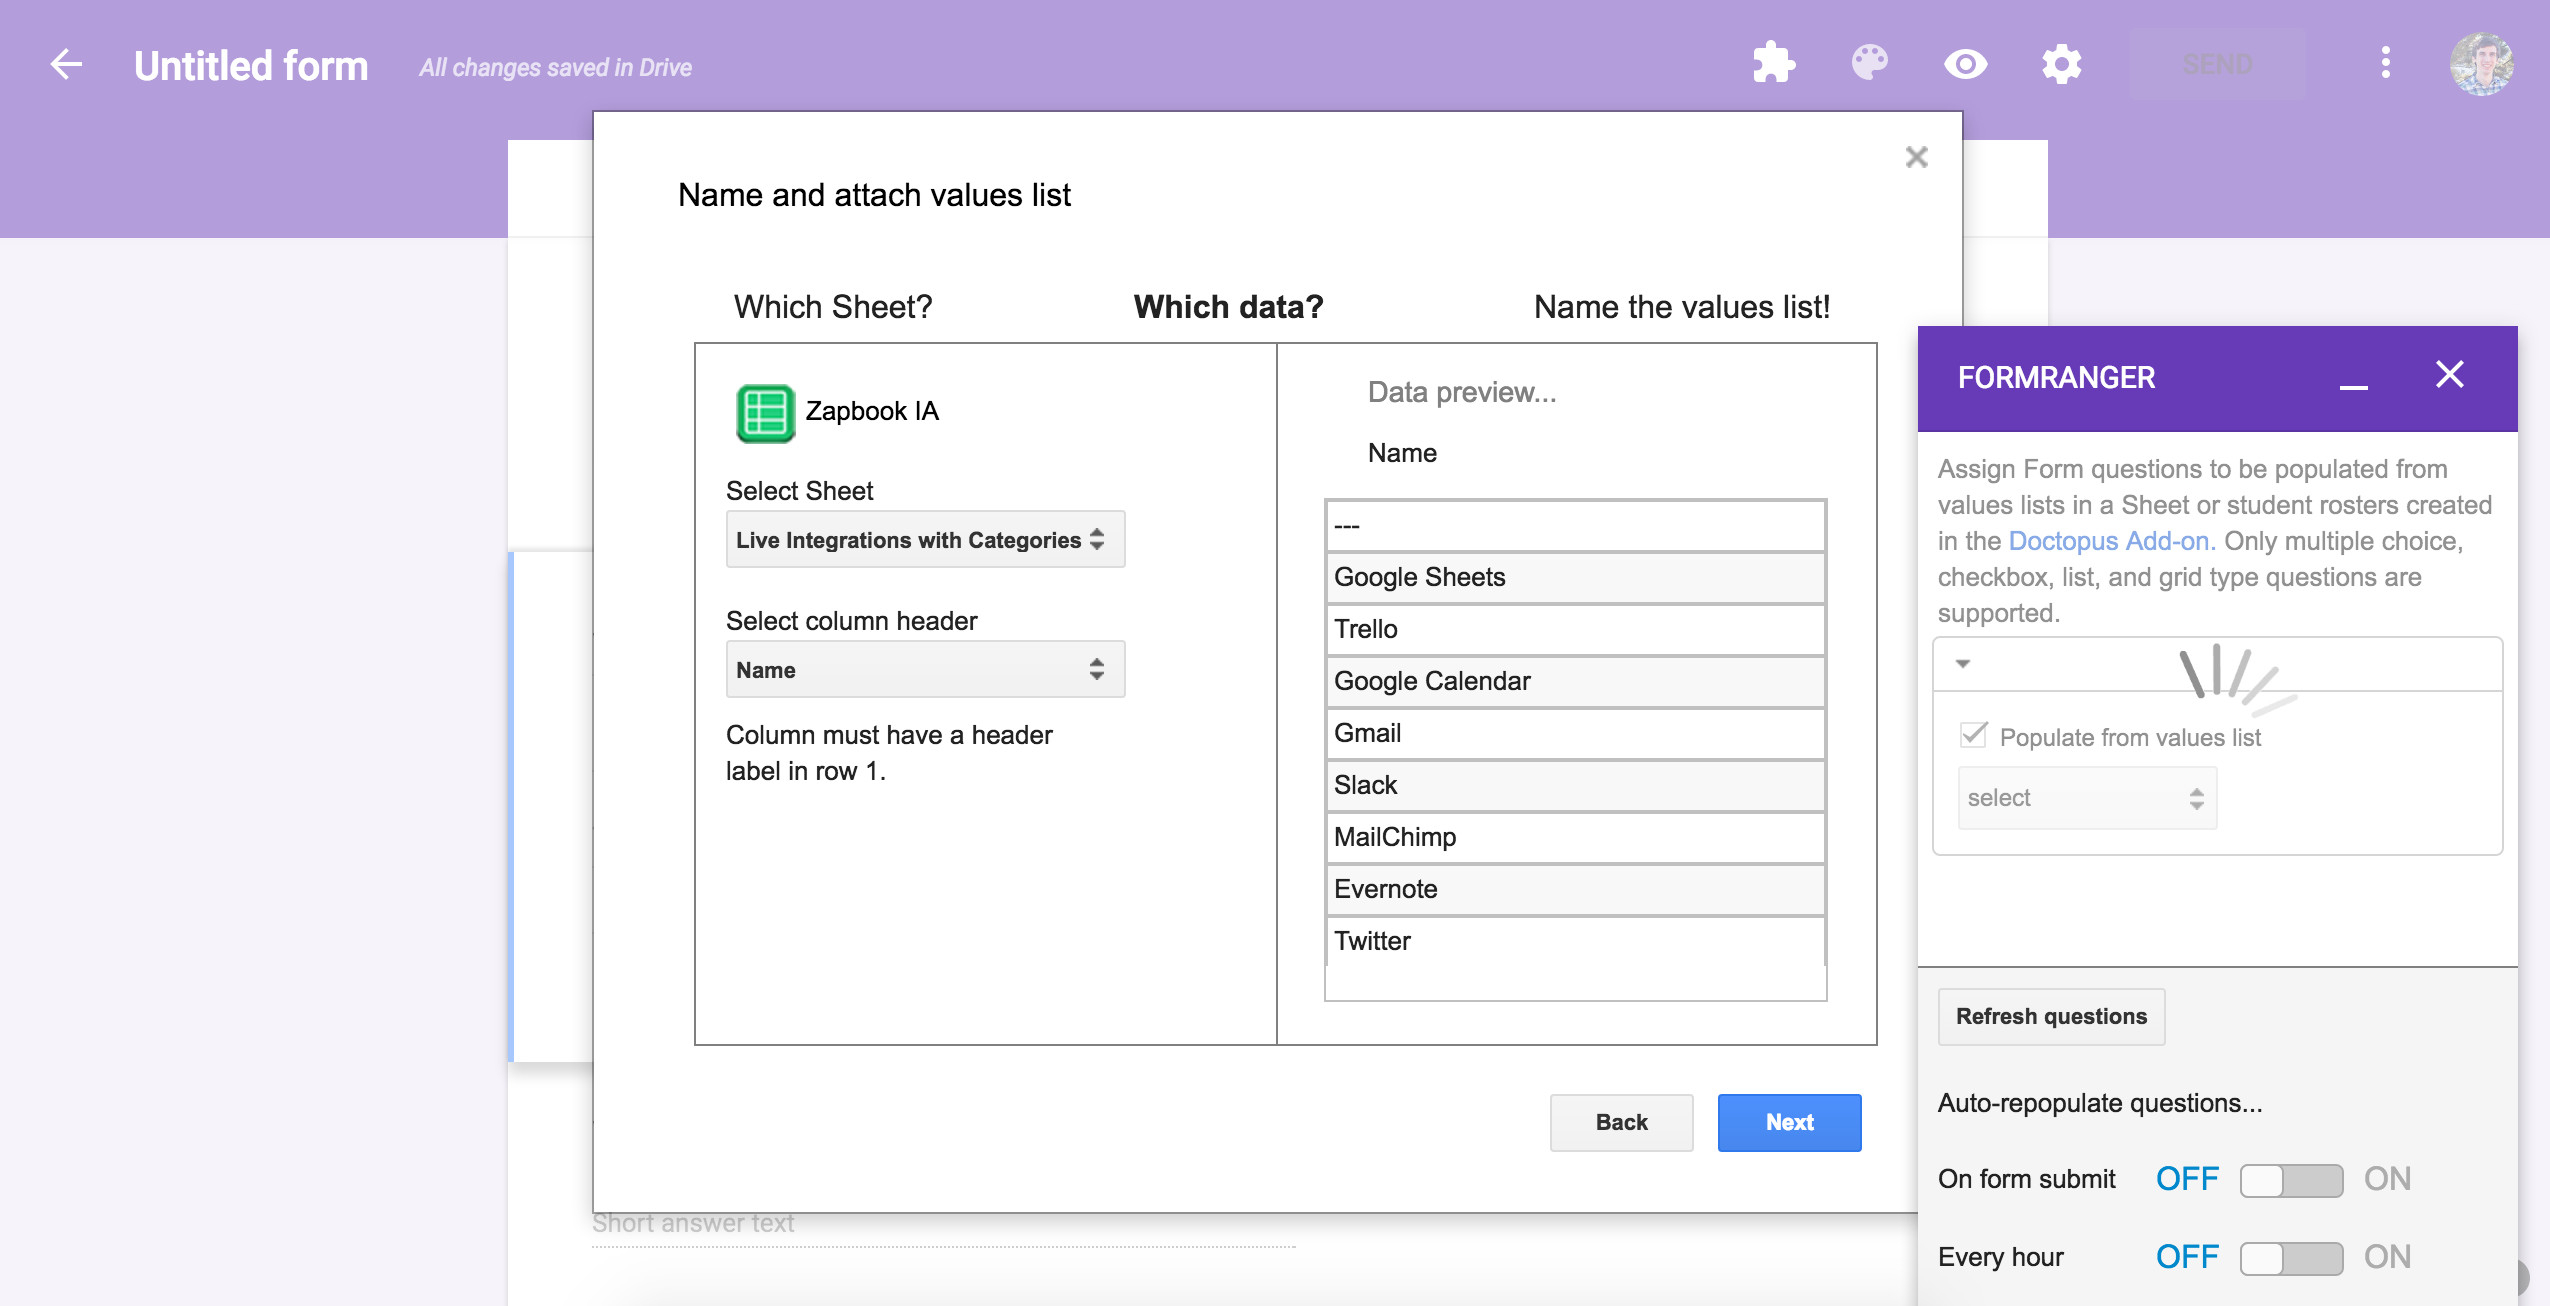 Google Order Form Template Inspirational Google Forms Throughout Google Label Templates